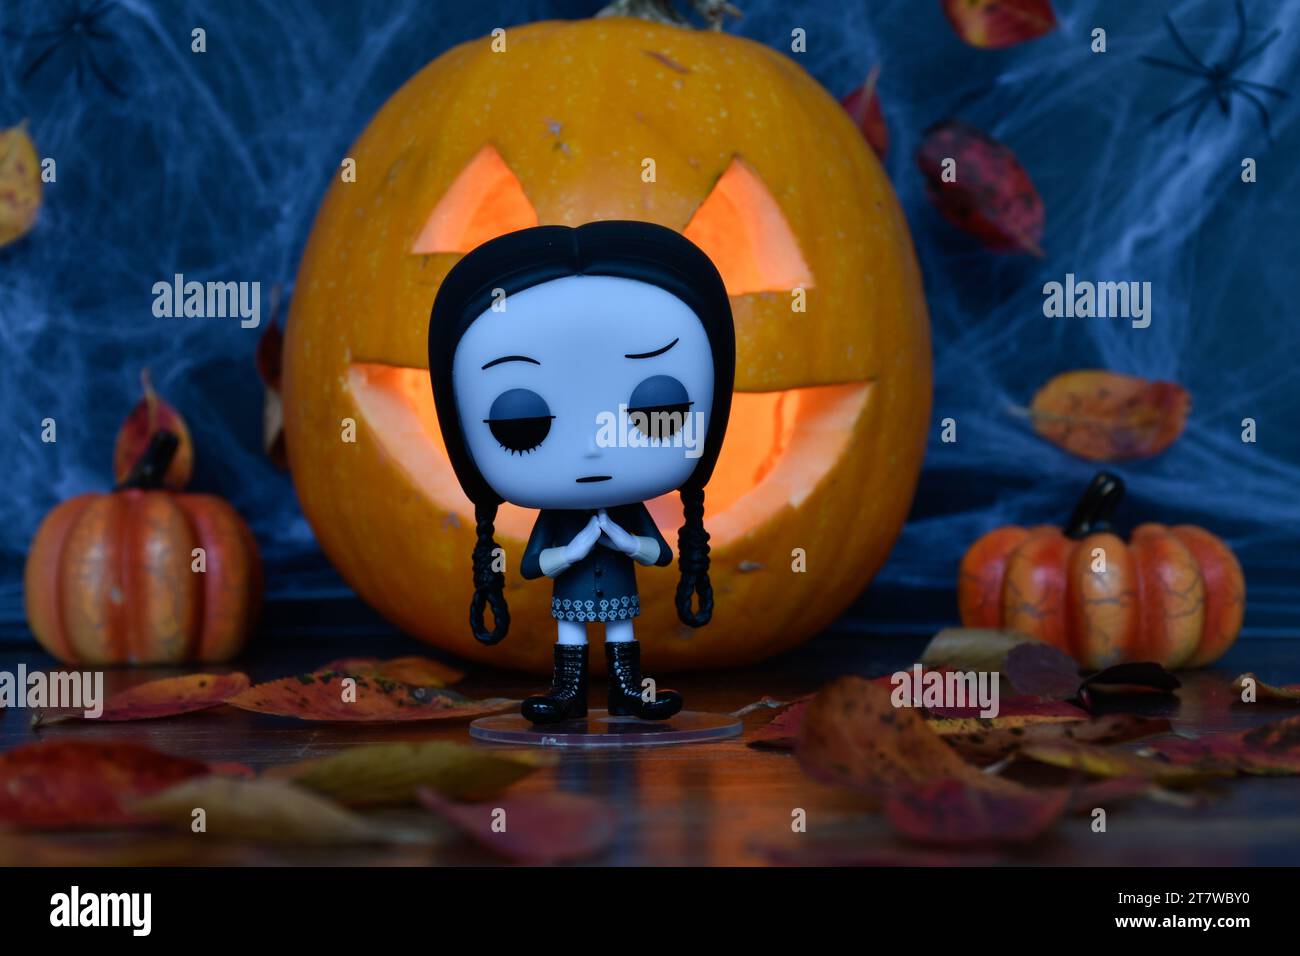 Funko Pop action figure of Wednesday Addams from animated film The Addams family. Halloween, Jack o lantern, spider web, autumn leaves, decor, spooky. Stock Photo